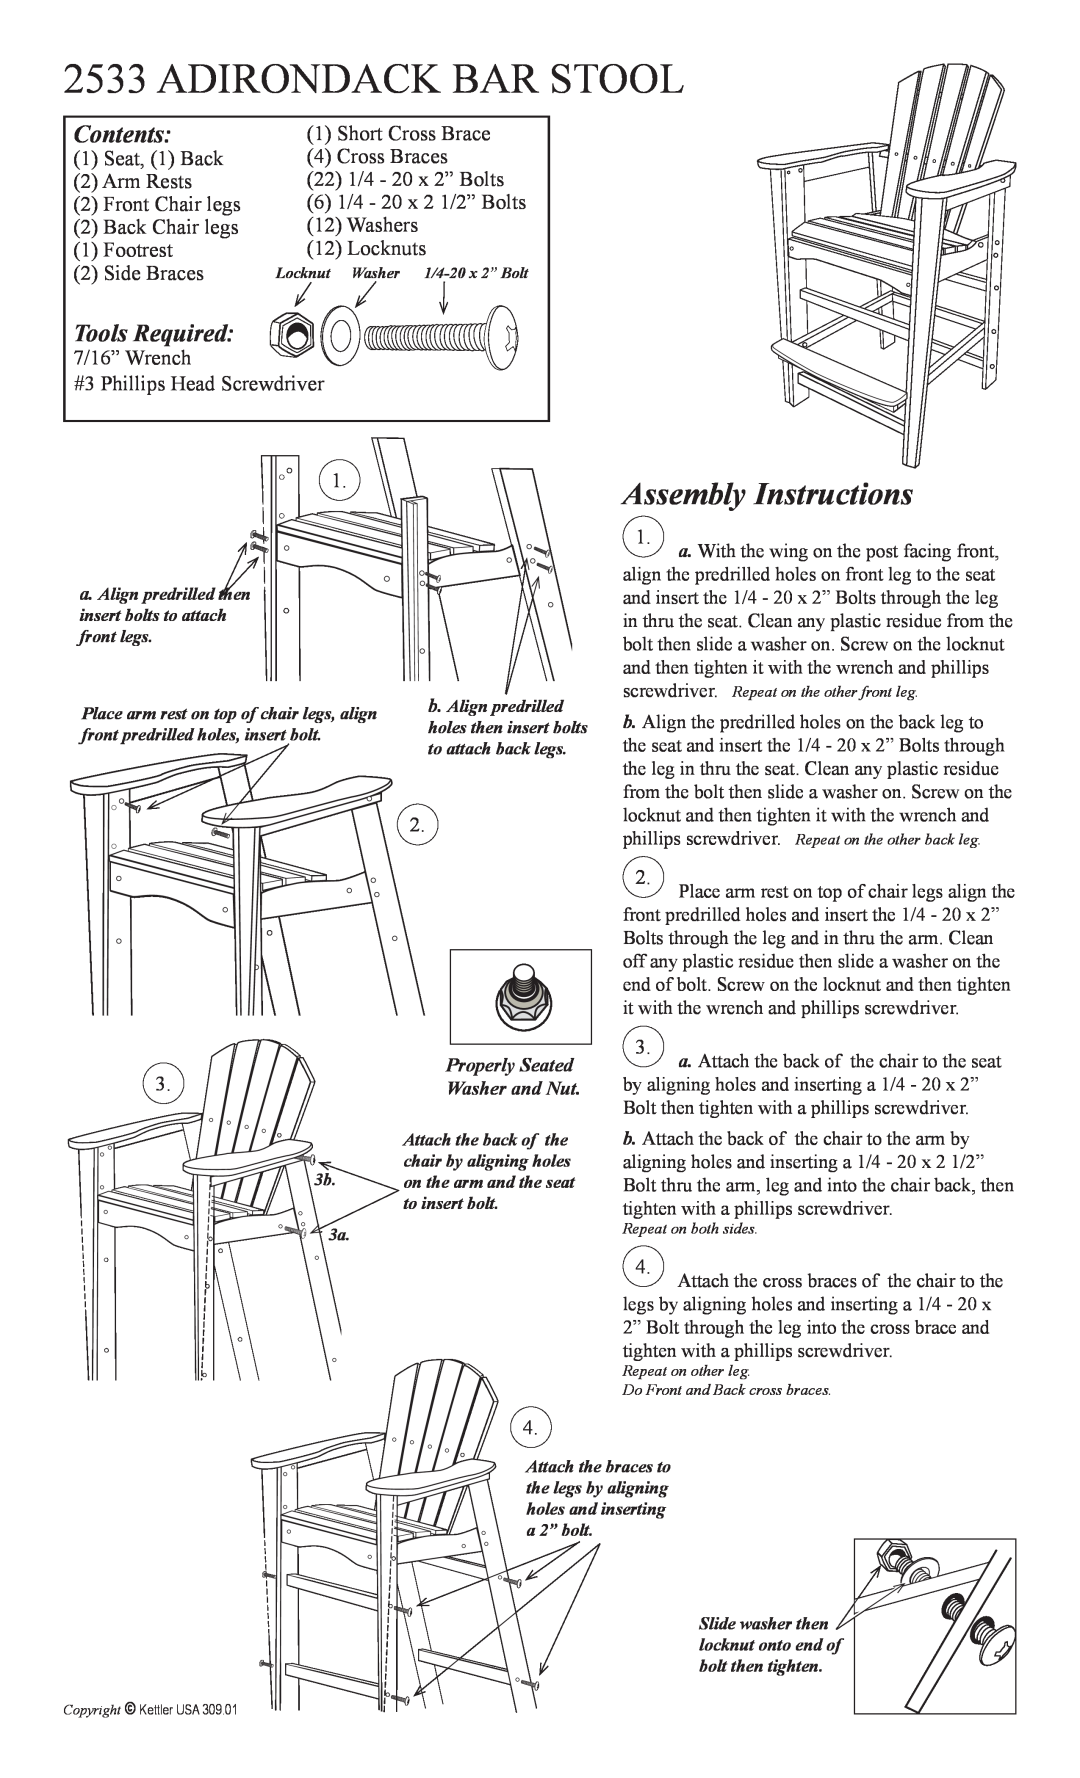 Kettler 2533 manual Assembly Instructions, Adirondack Bar Stool, Contents, Tools Required 